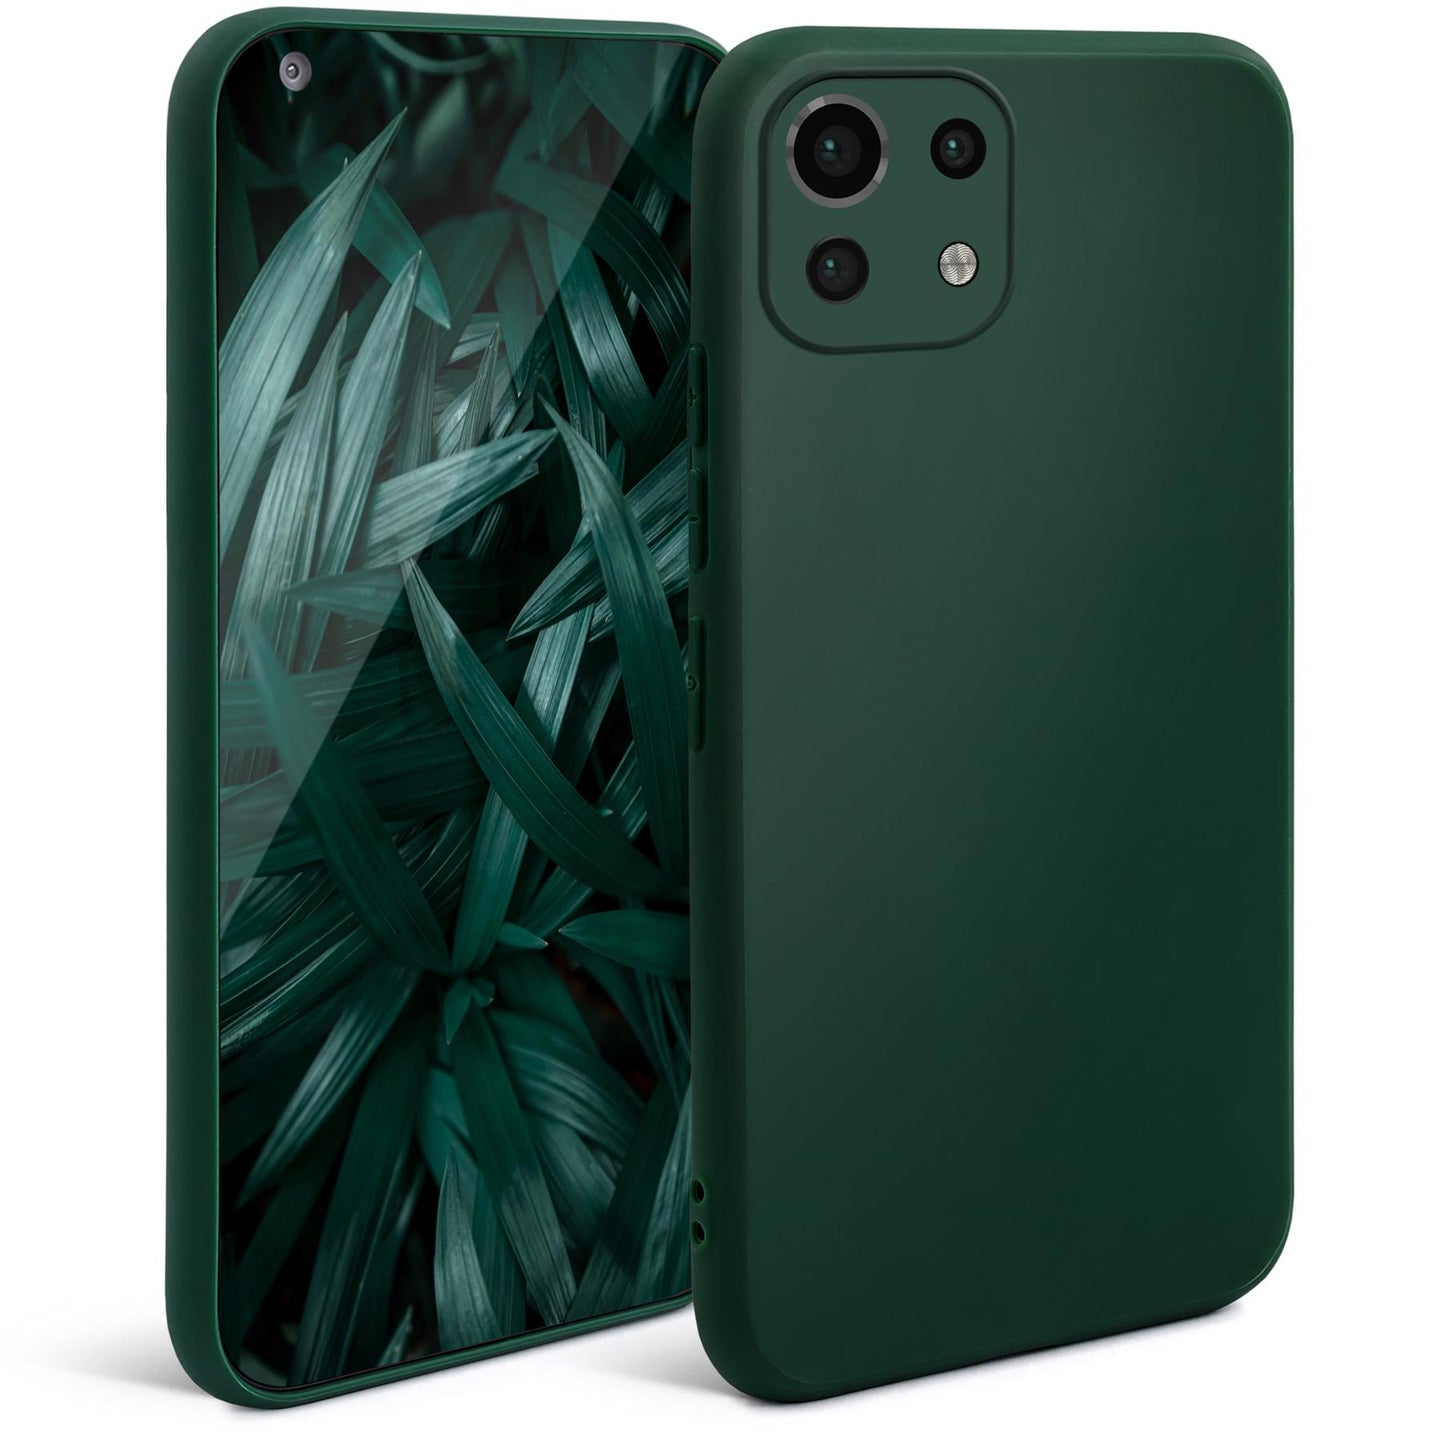 Moozy Minimalist Series Silicone Case for Xiaomi Mi 11 Lite 5G and 4G, Midnight Green - Matte Finish Lightweight Mobile Phone Case Slim Protective